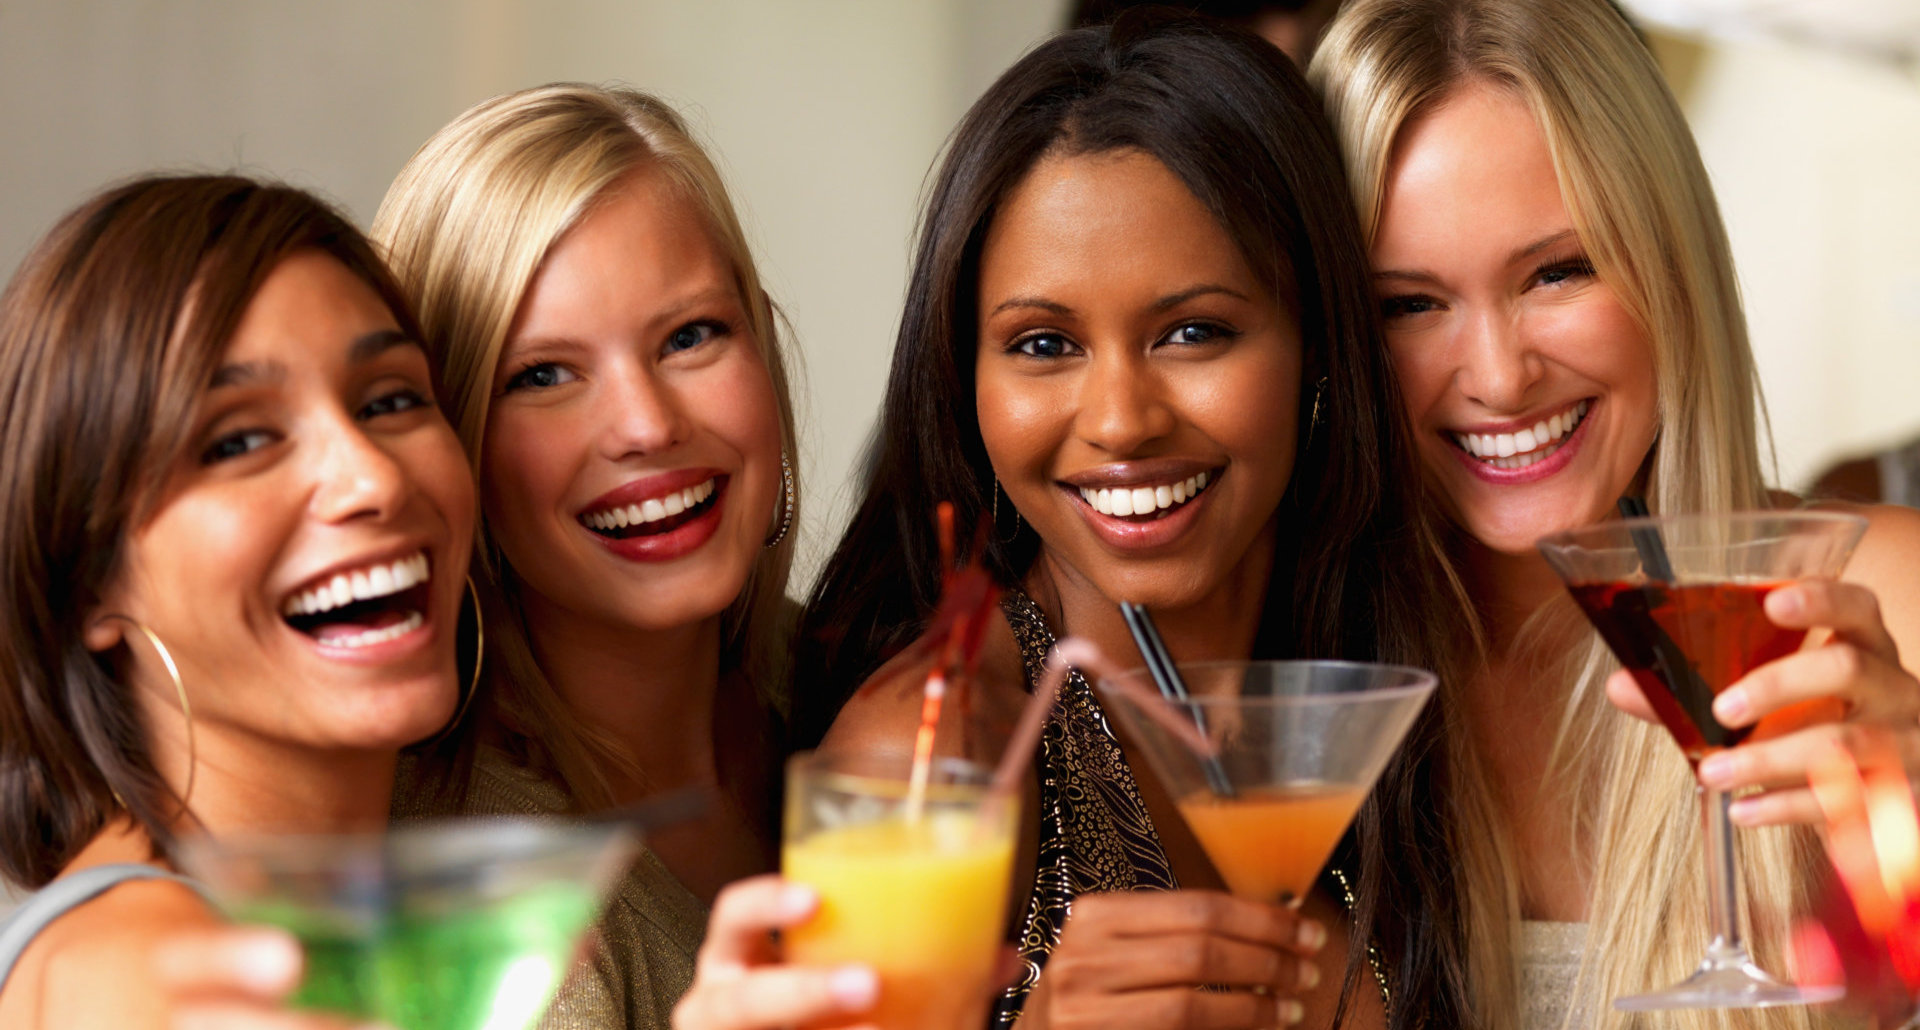 Young girls holding drinks